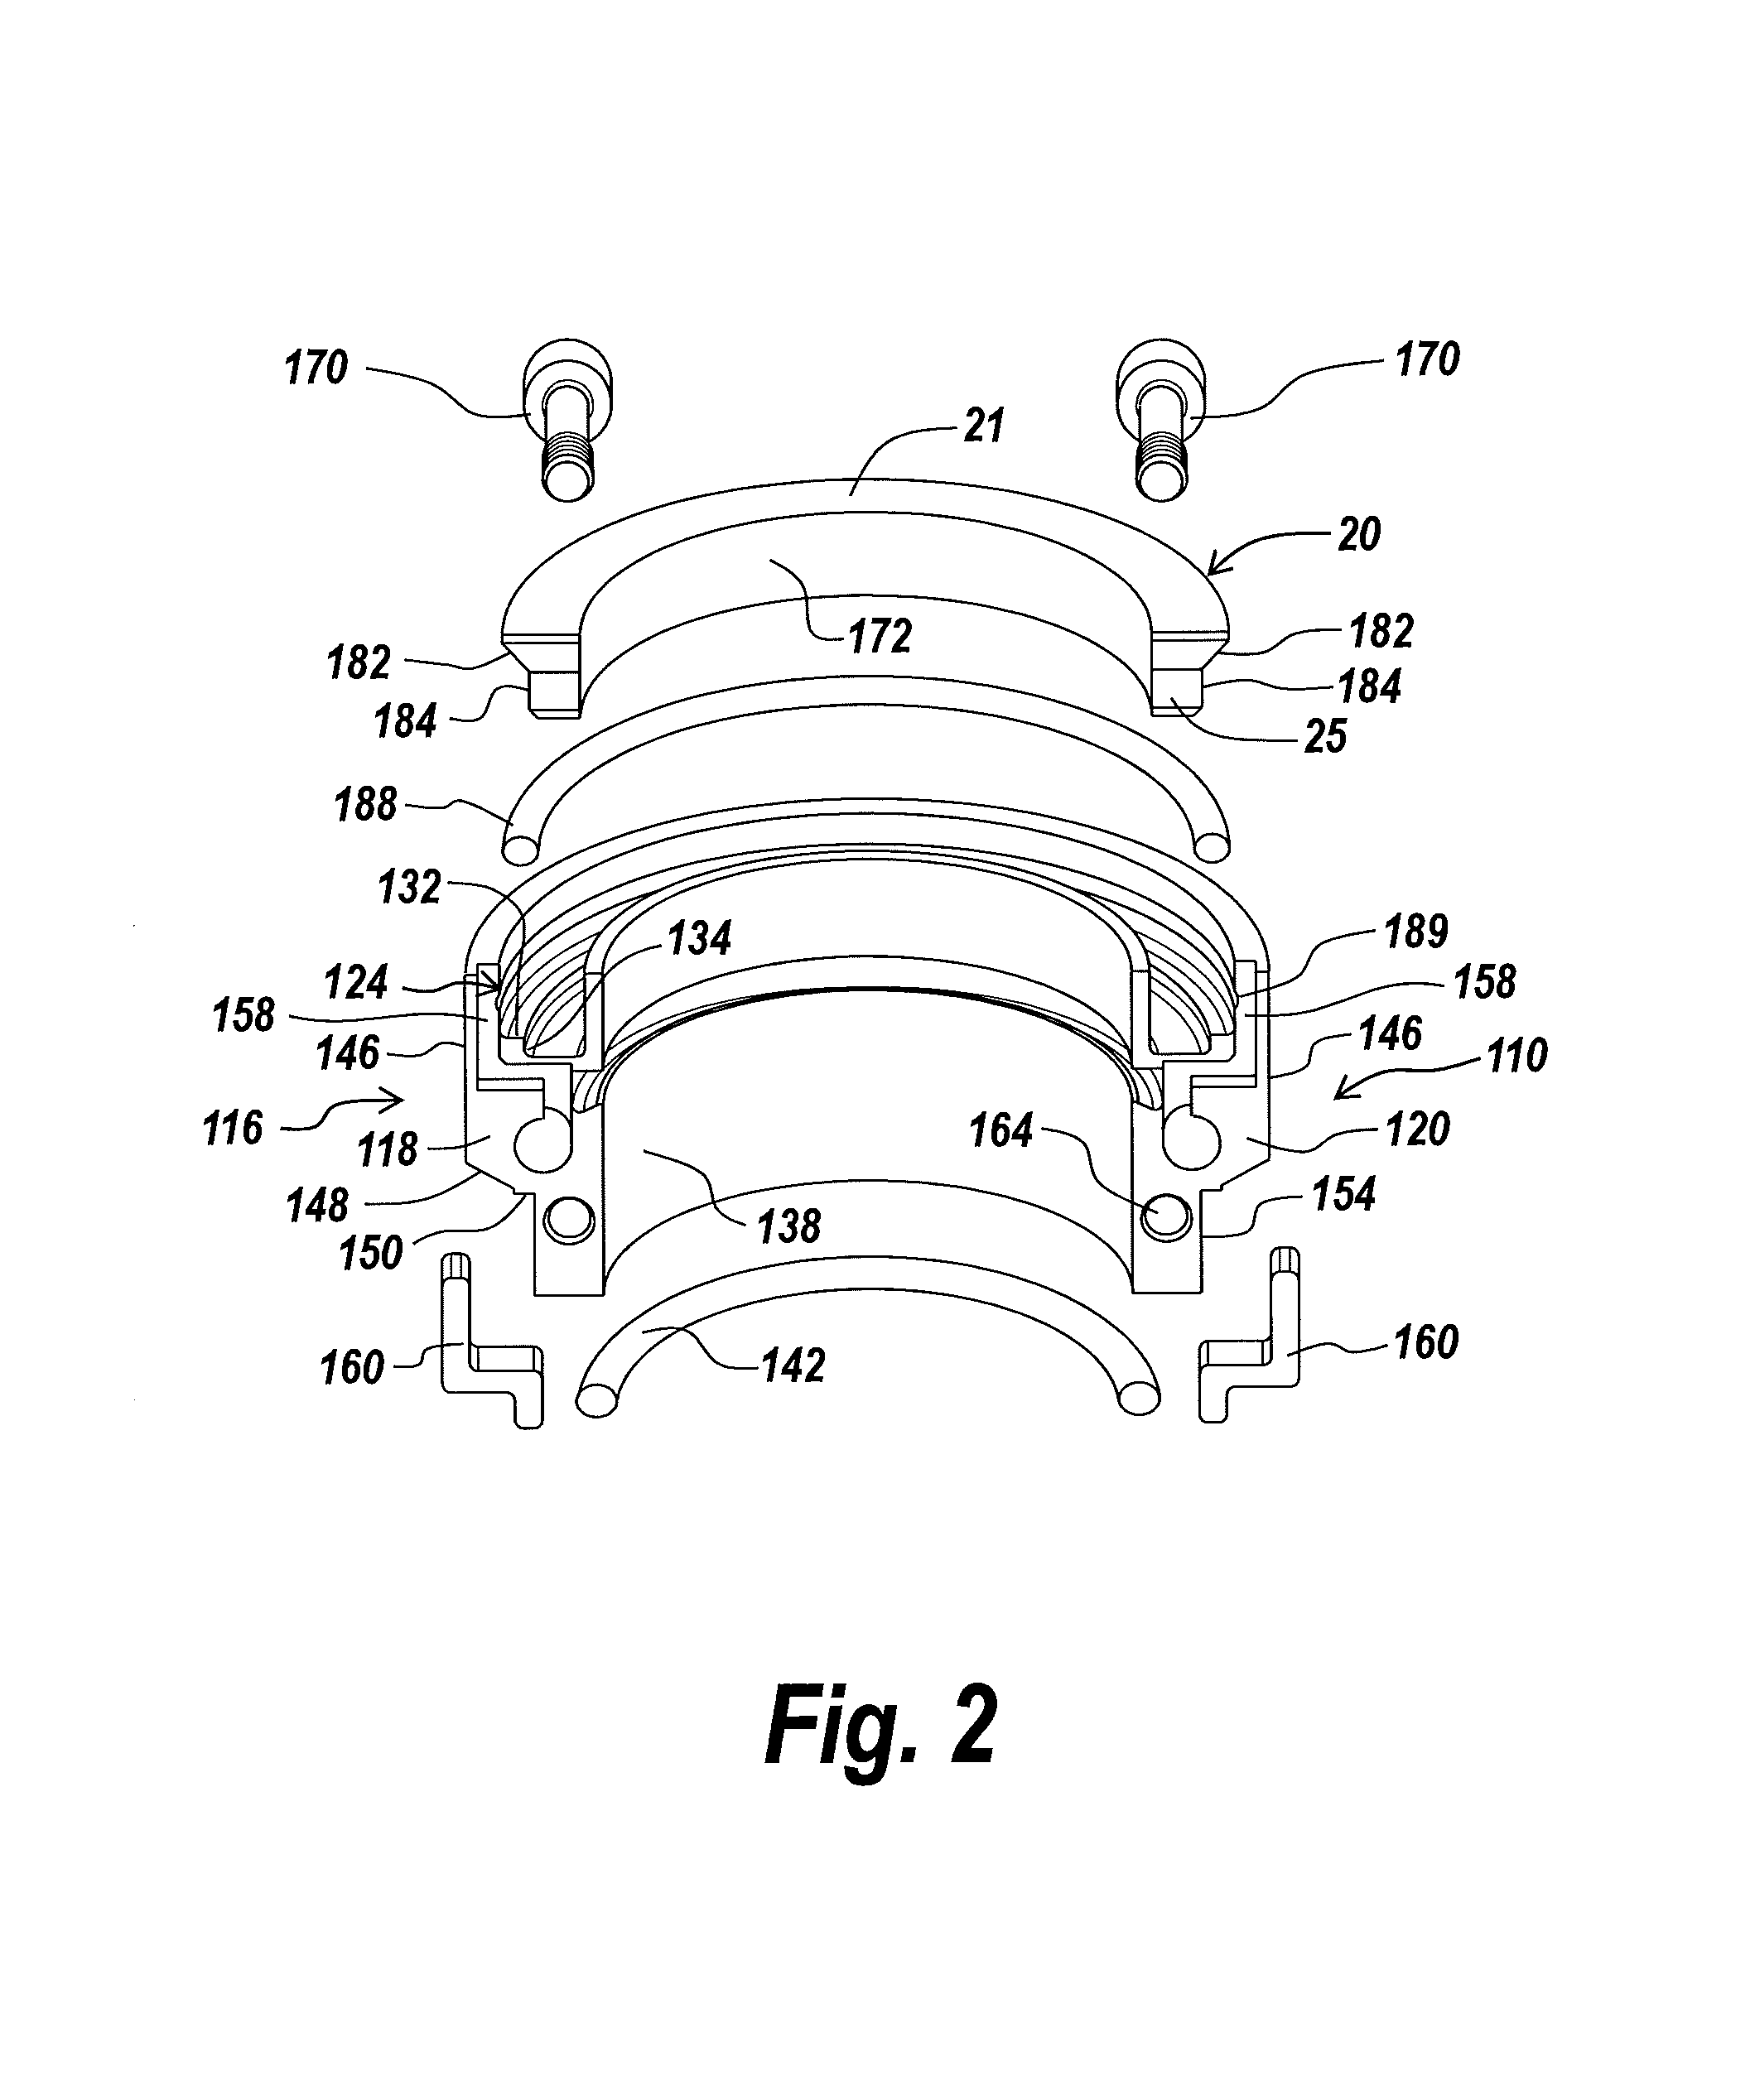 Self aligning split mechanical seal employing a selectively engageable axial biasing assembly